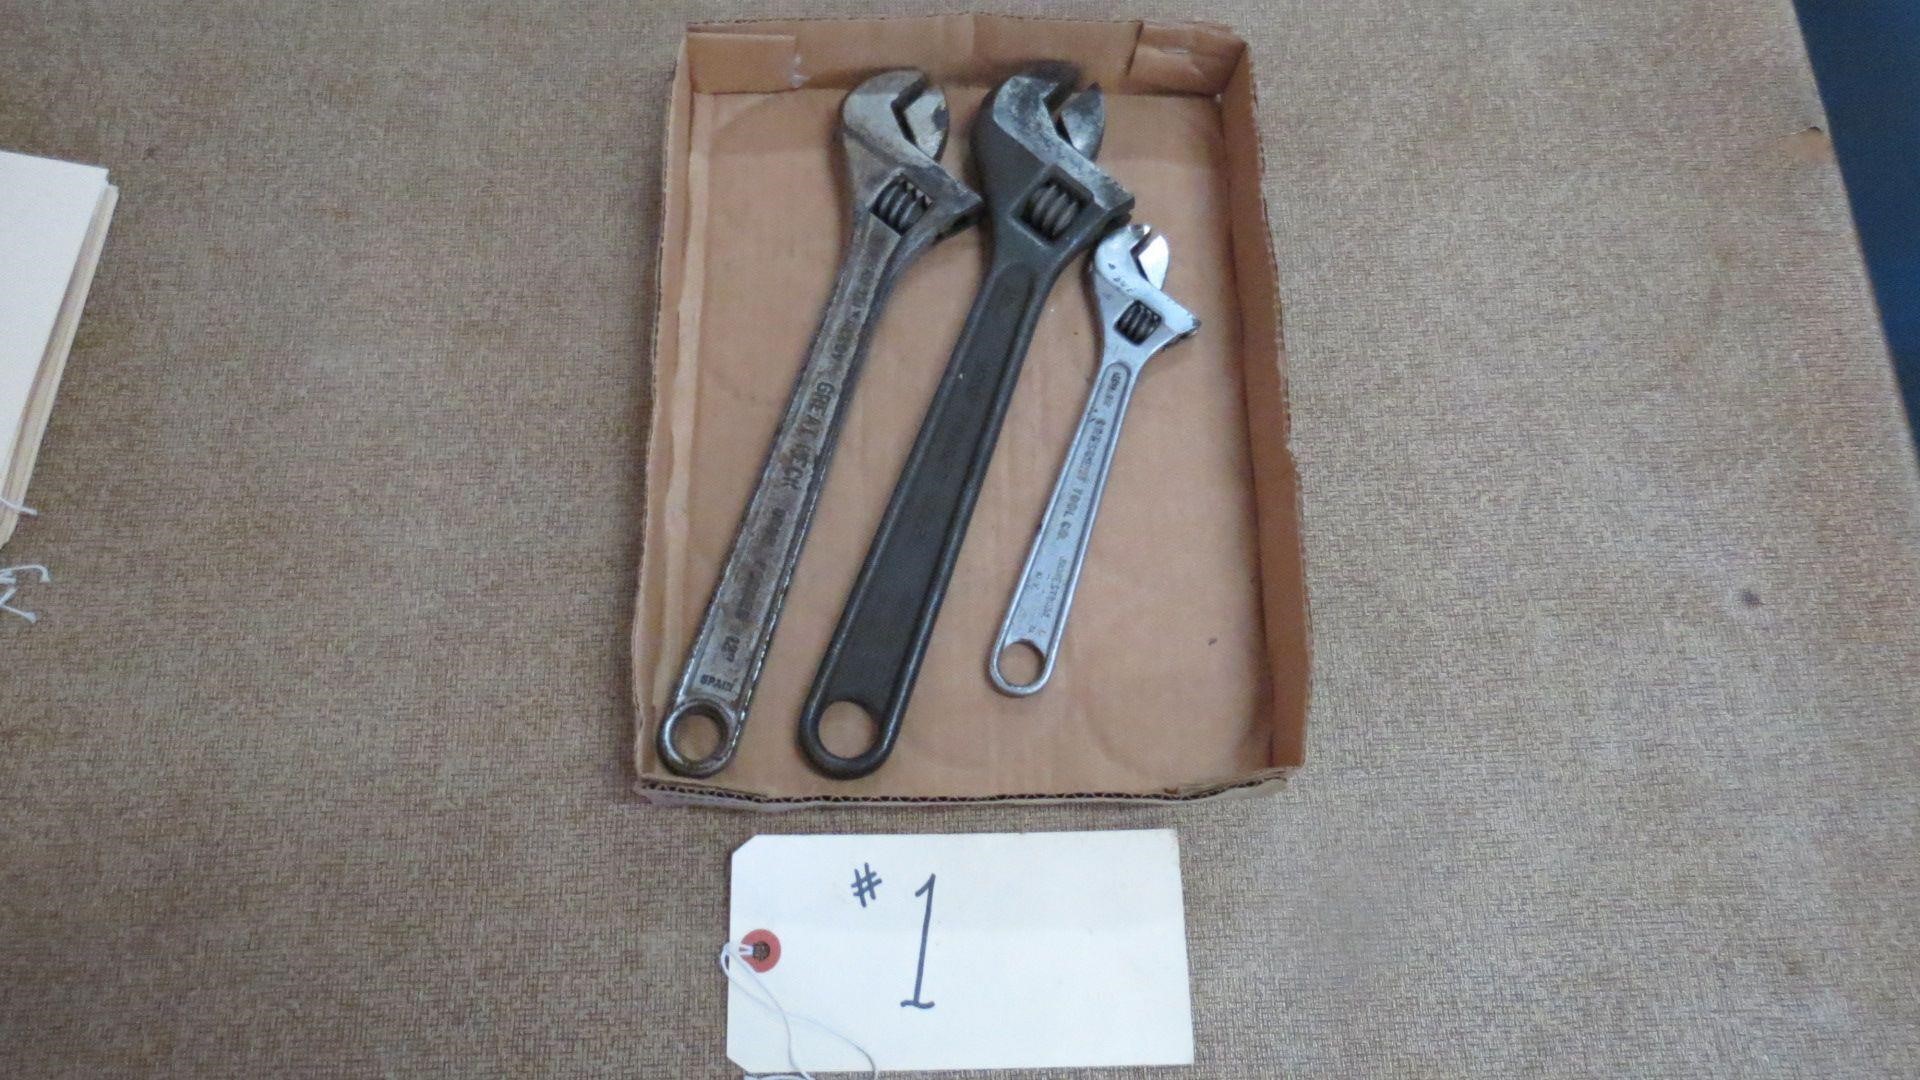 3 CRESCENT WRENCHES